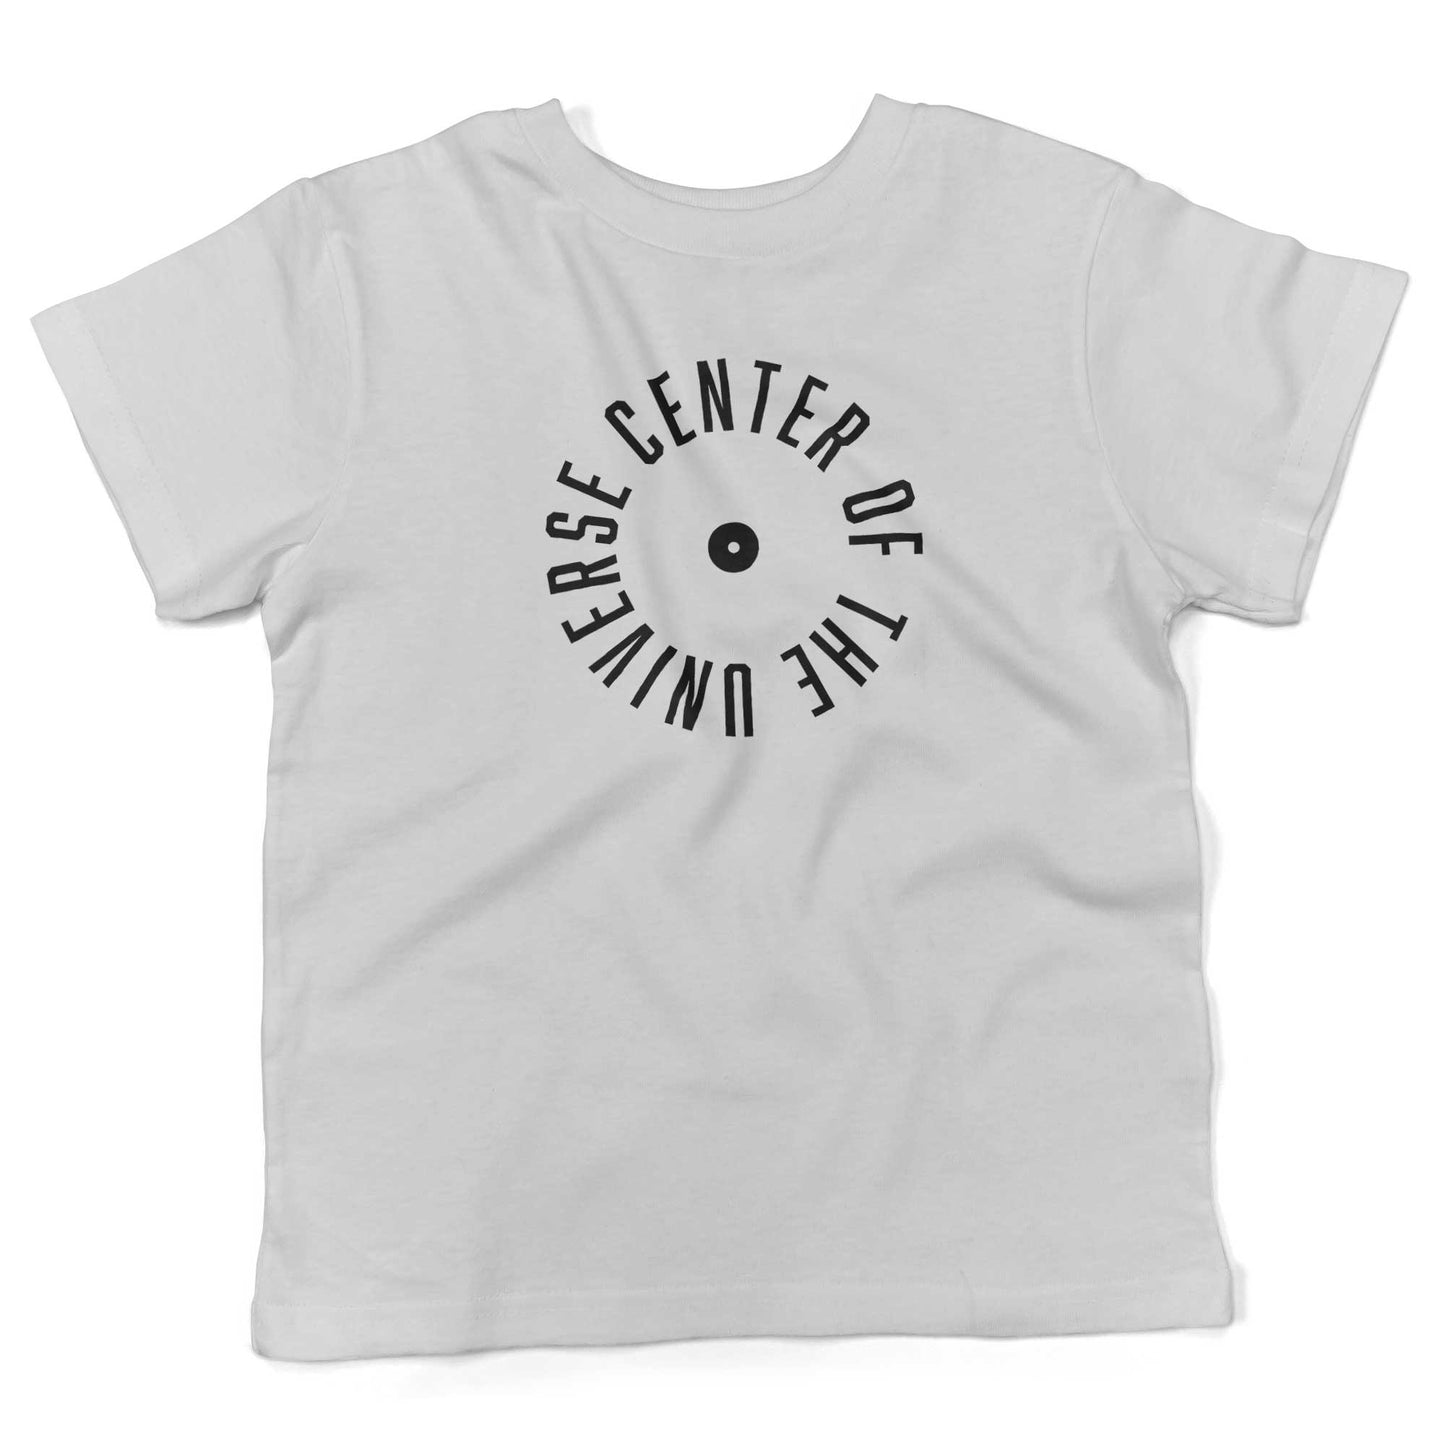 Center Of The Universe Toddler Shirt-White-2T